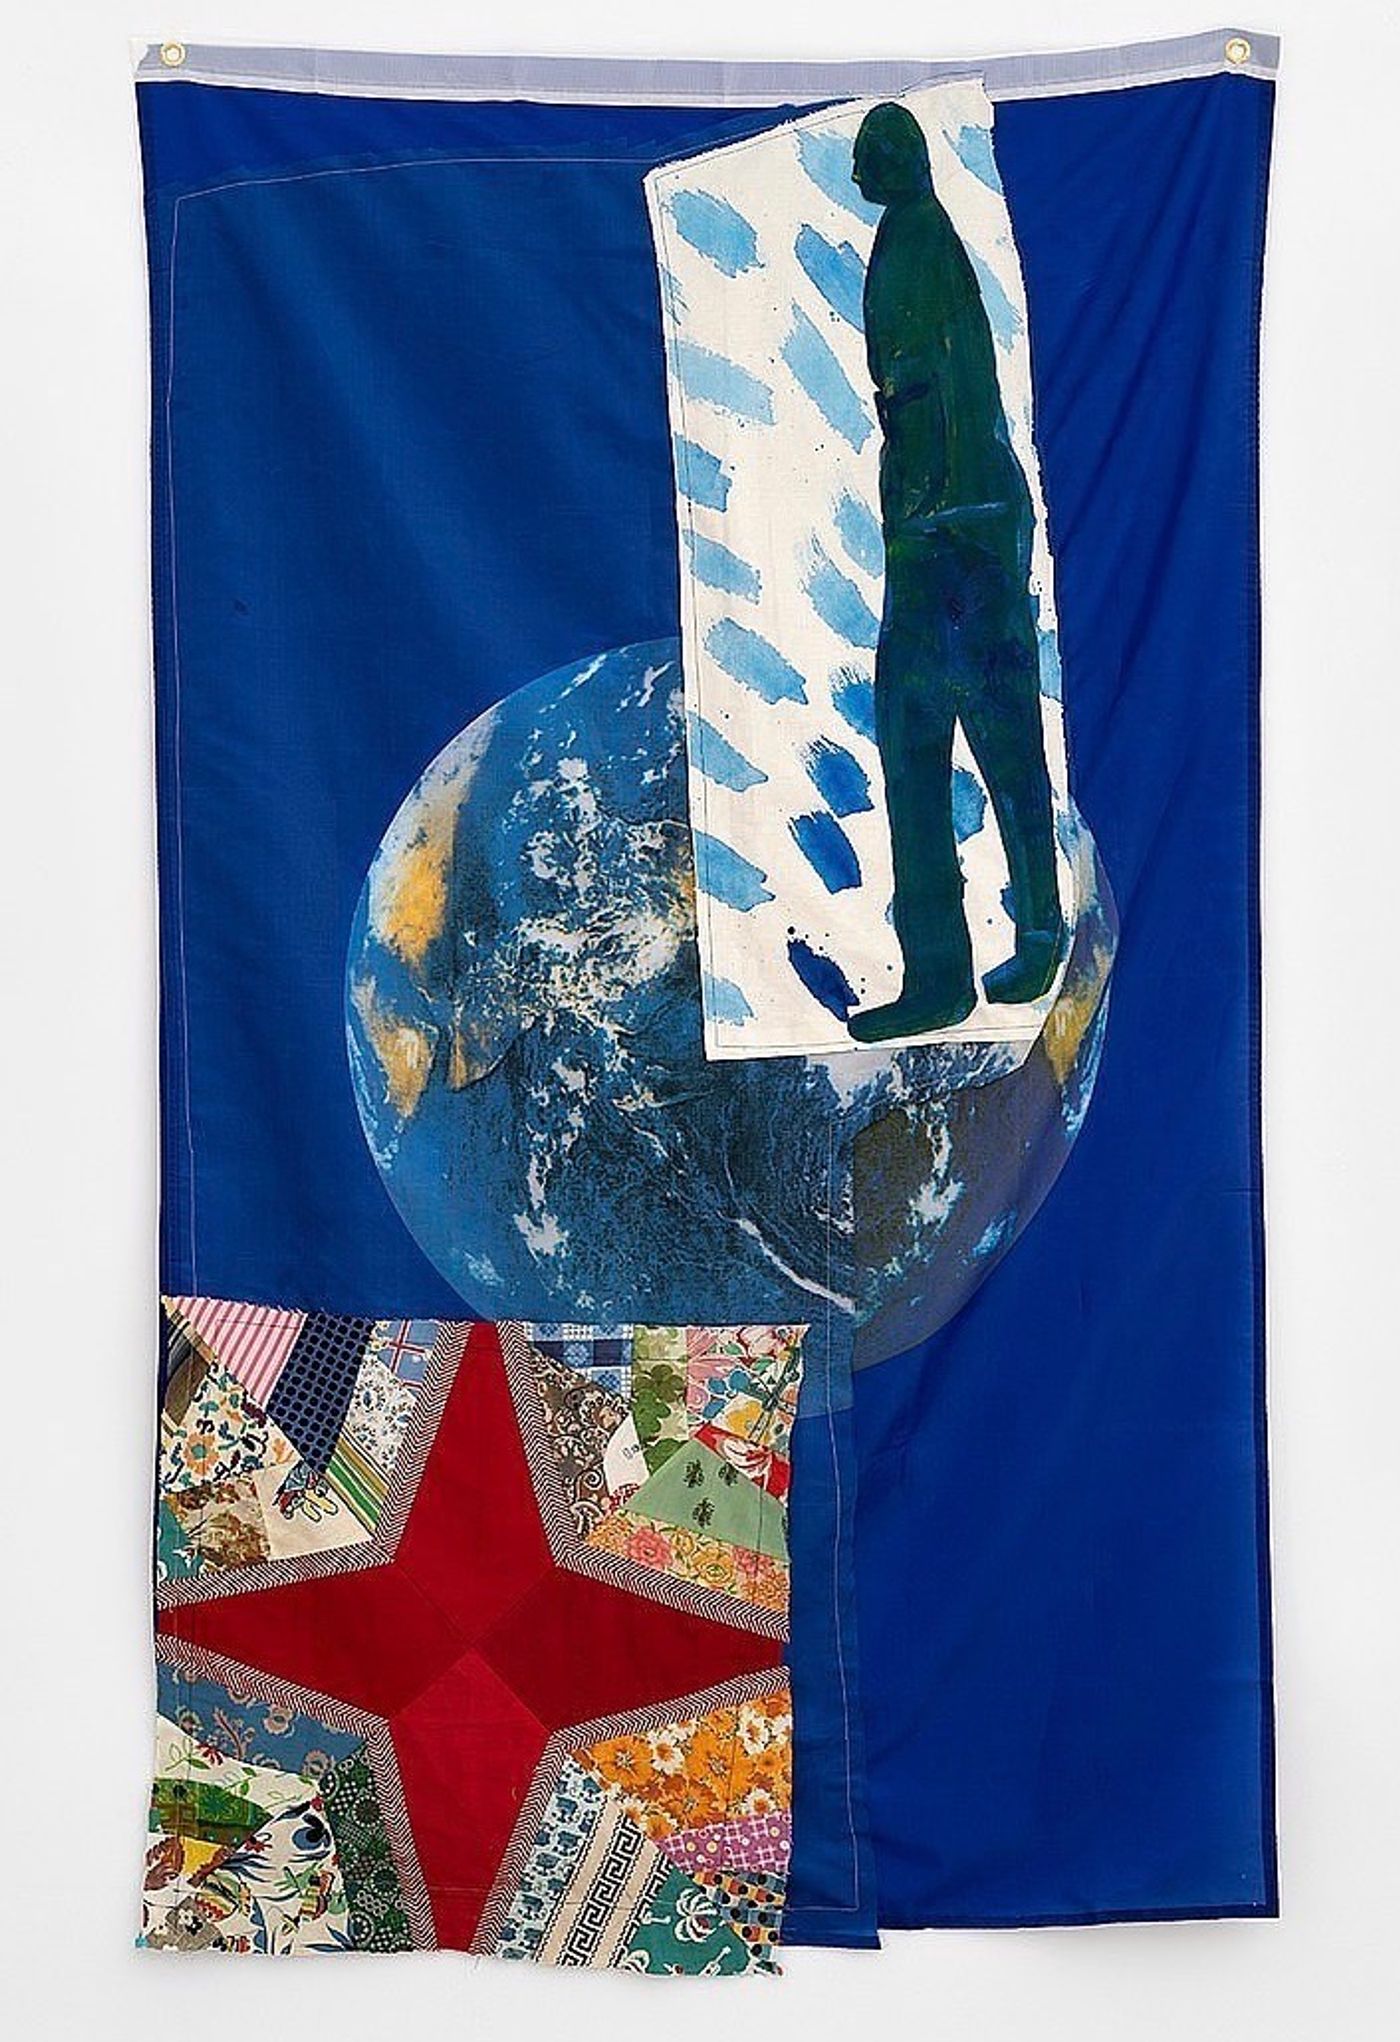 Image of Untitled (Walk), 2022: Fabric and paint on flag